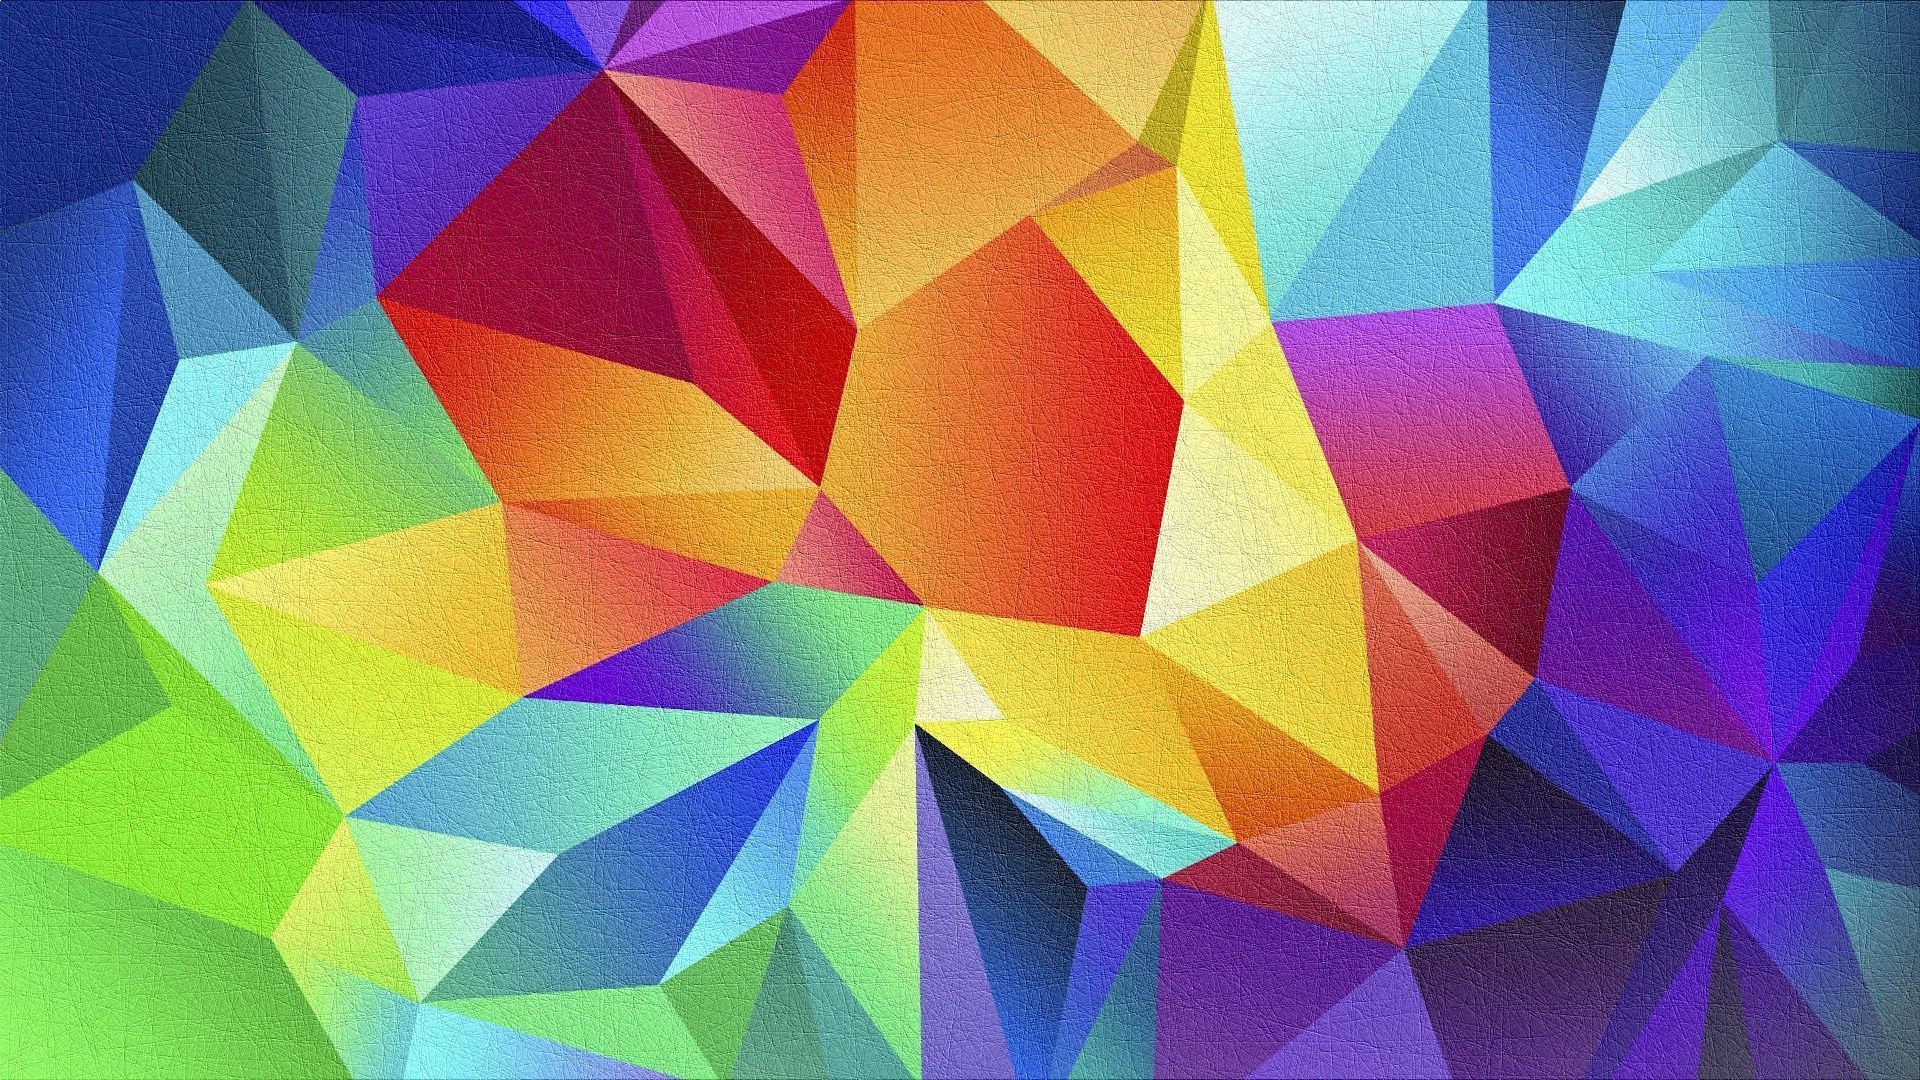 Geometric Shapes Wallpapers